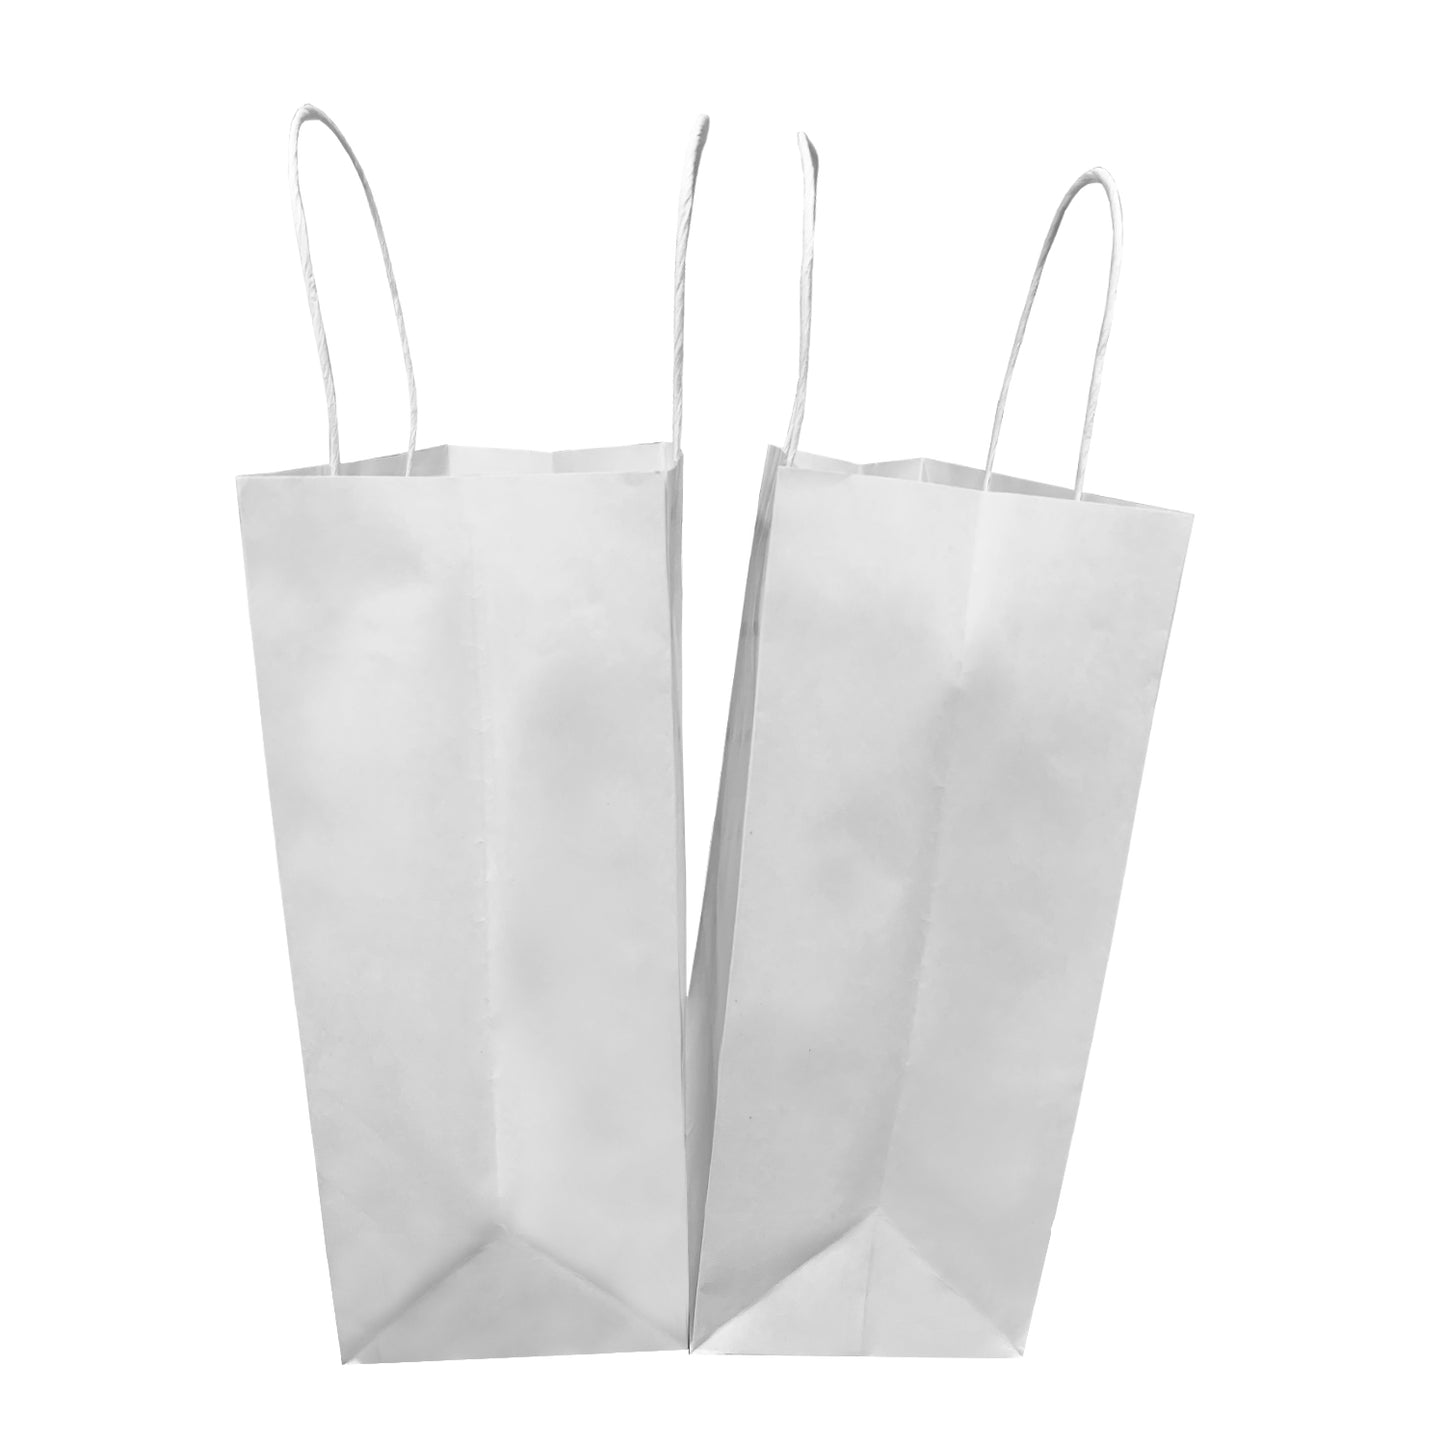 250 Pcs, Debbie, 10x5x13 inches, Kraft Paper Bags, with Twisted Handle